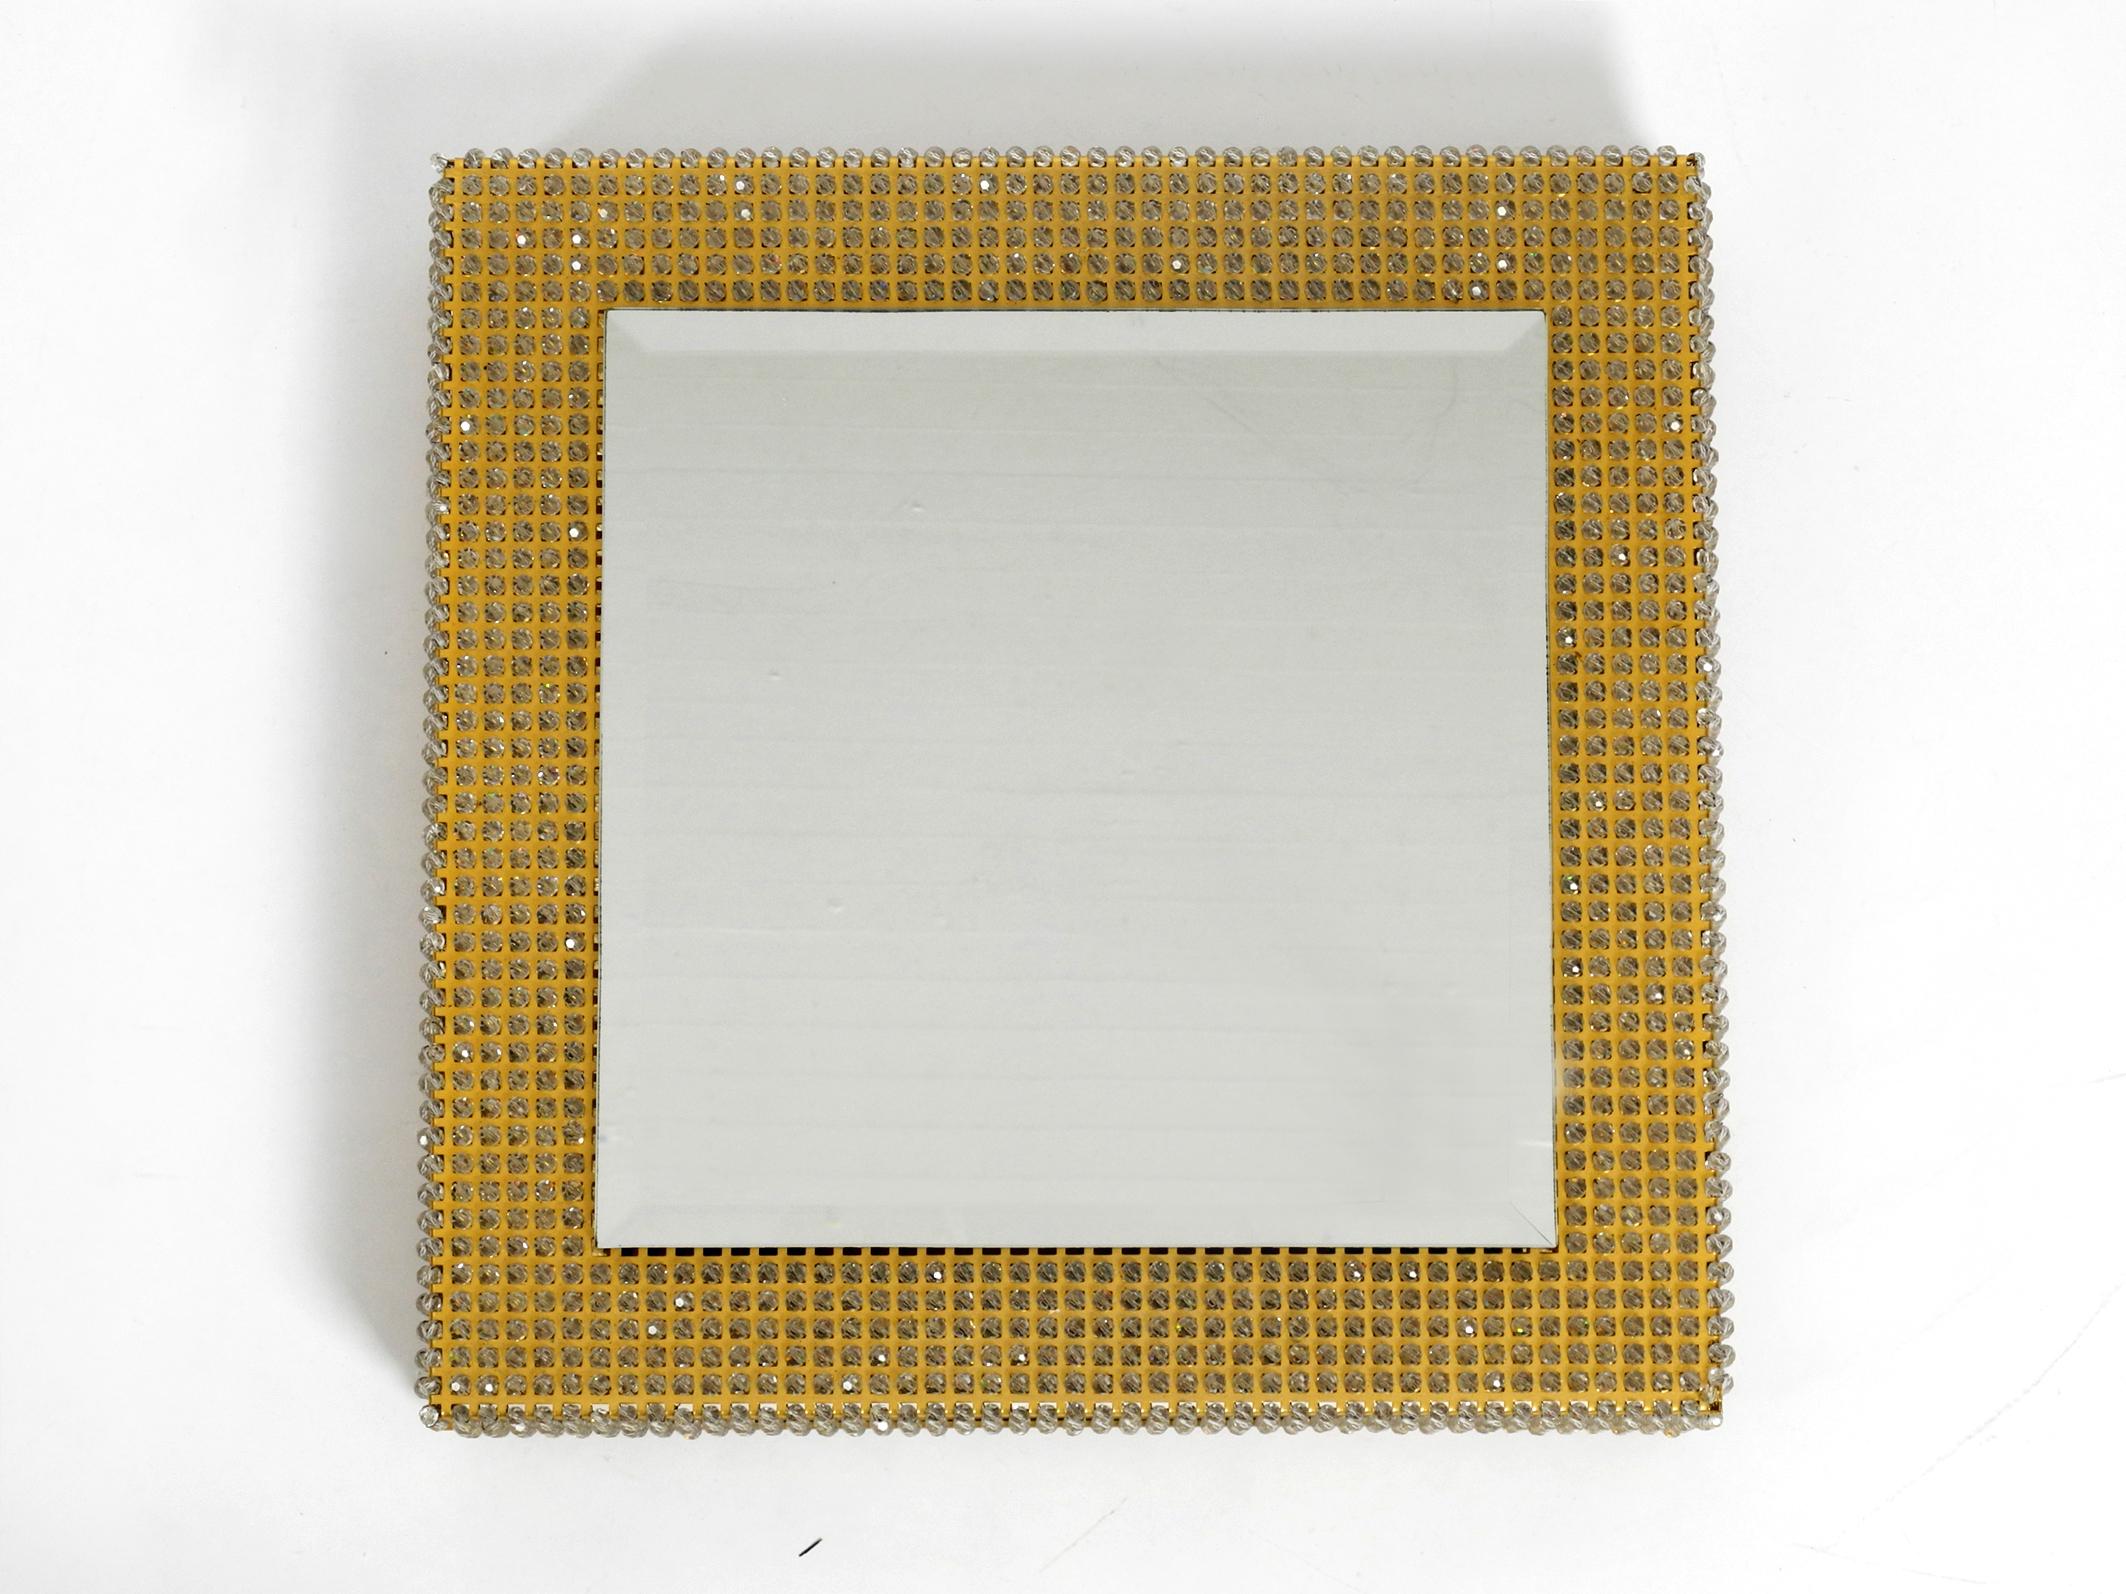 Beautiful background illuminated brass metal mirror from the early 1960s by Palwa.
Made in Germany. Very rare in this square design with a high frame full of crystal stones.
Great glare-free light. Very thick, massive cut mirror glass.
Mirror